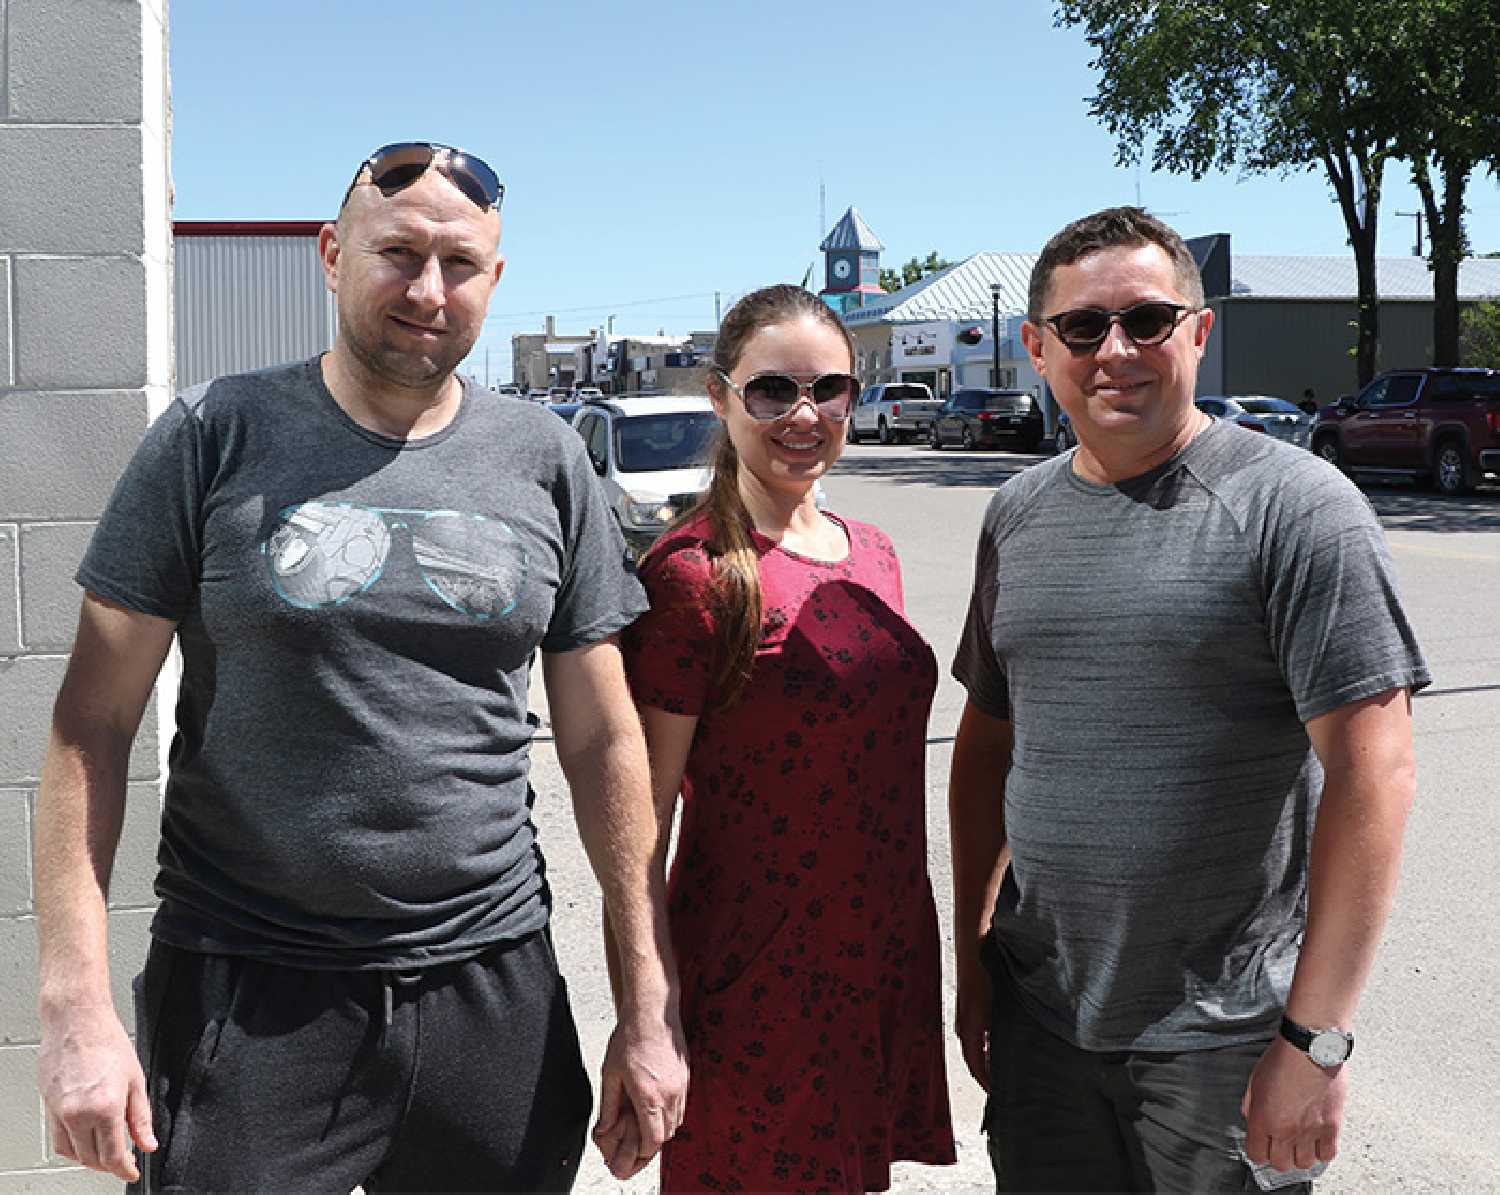 Roman and Julia Marynets, who arrived in Moosomin from Ukraine last week, with Roman Chernykh of the local Ukrainian community, at right.